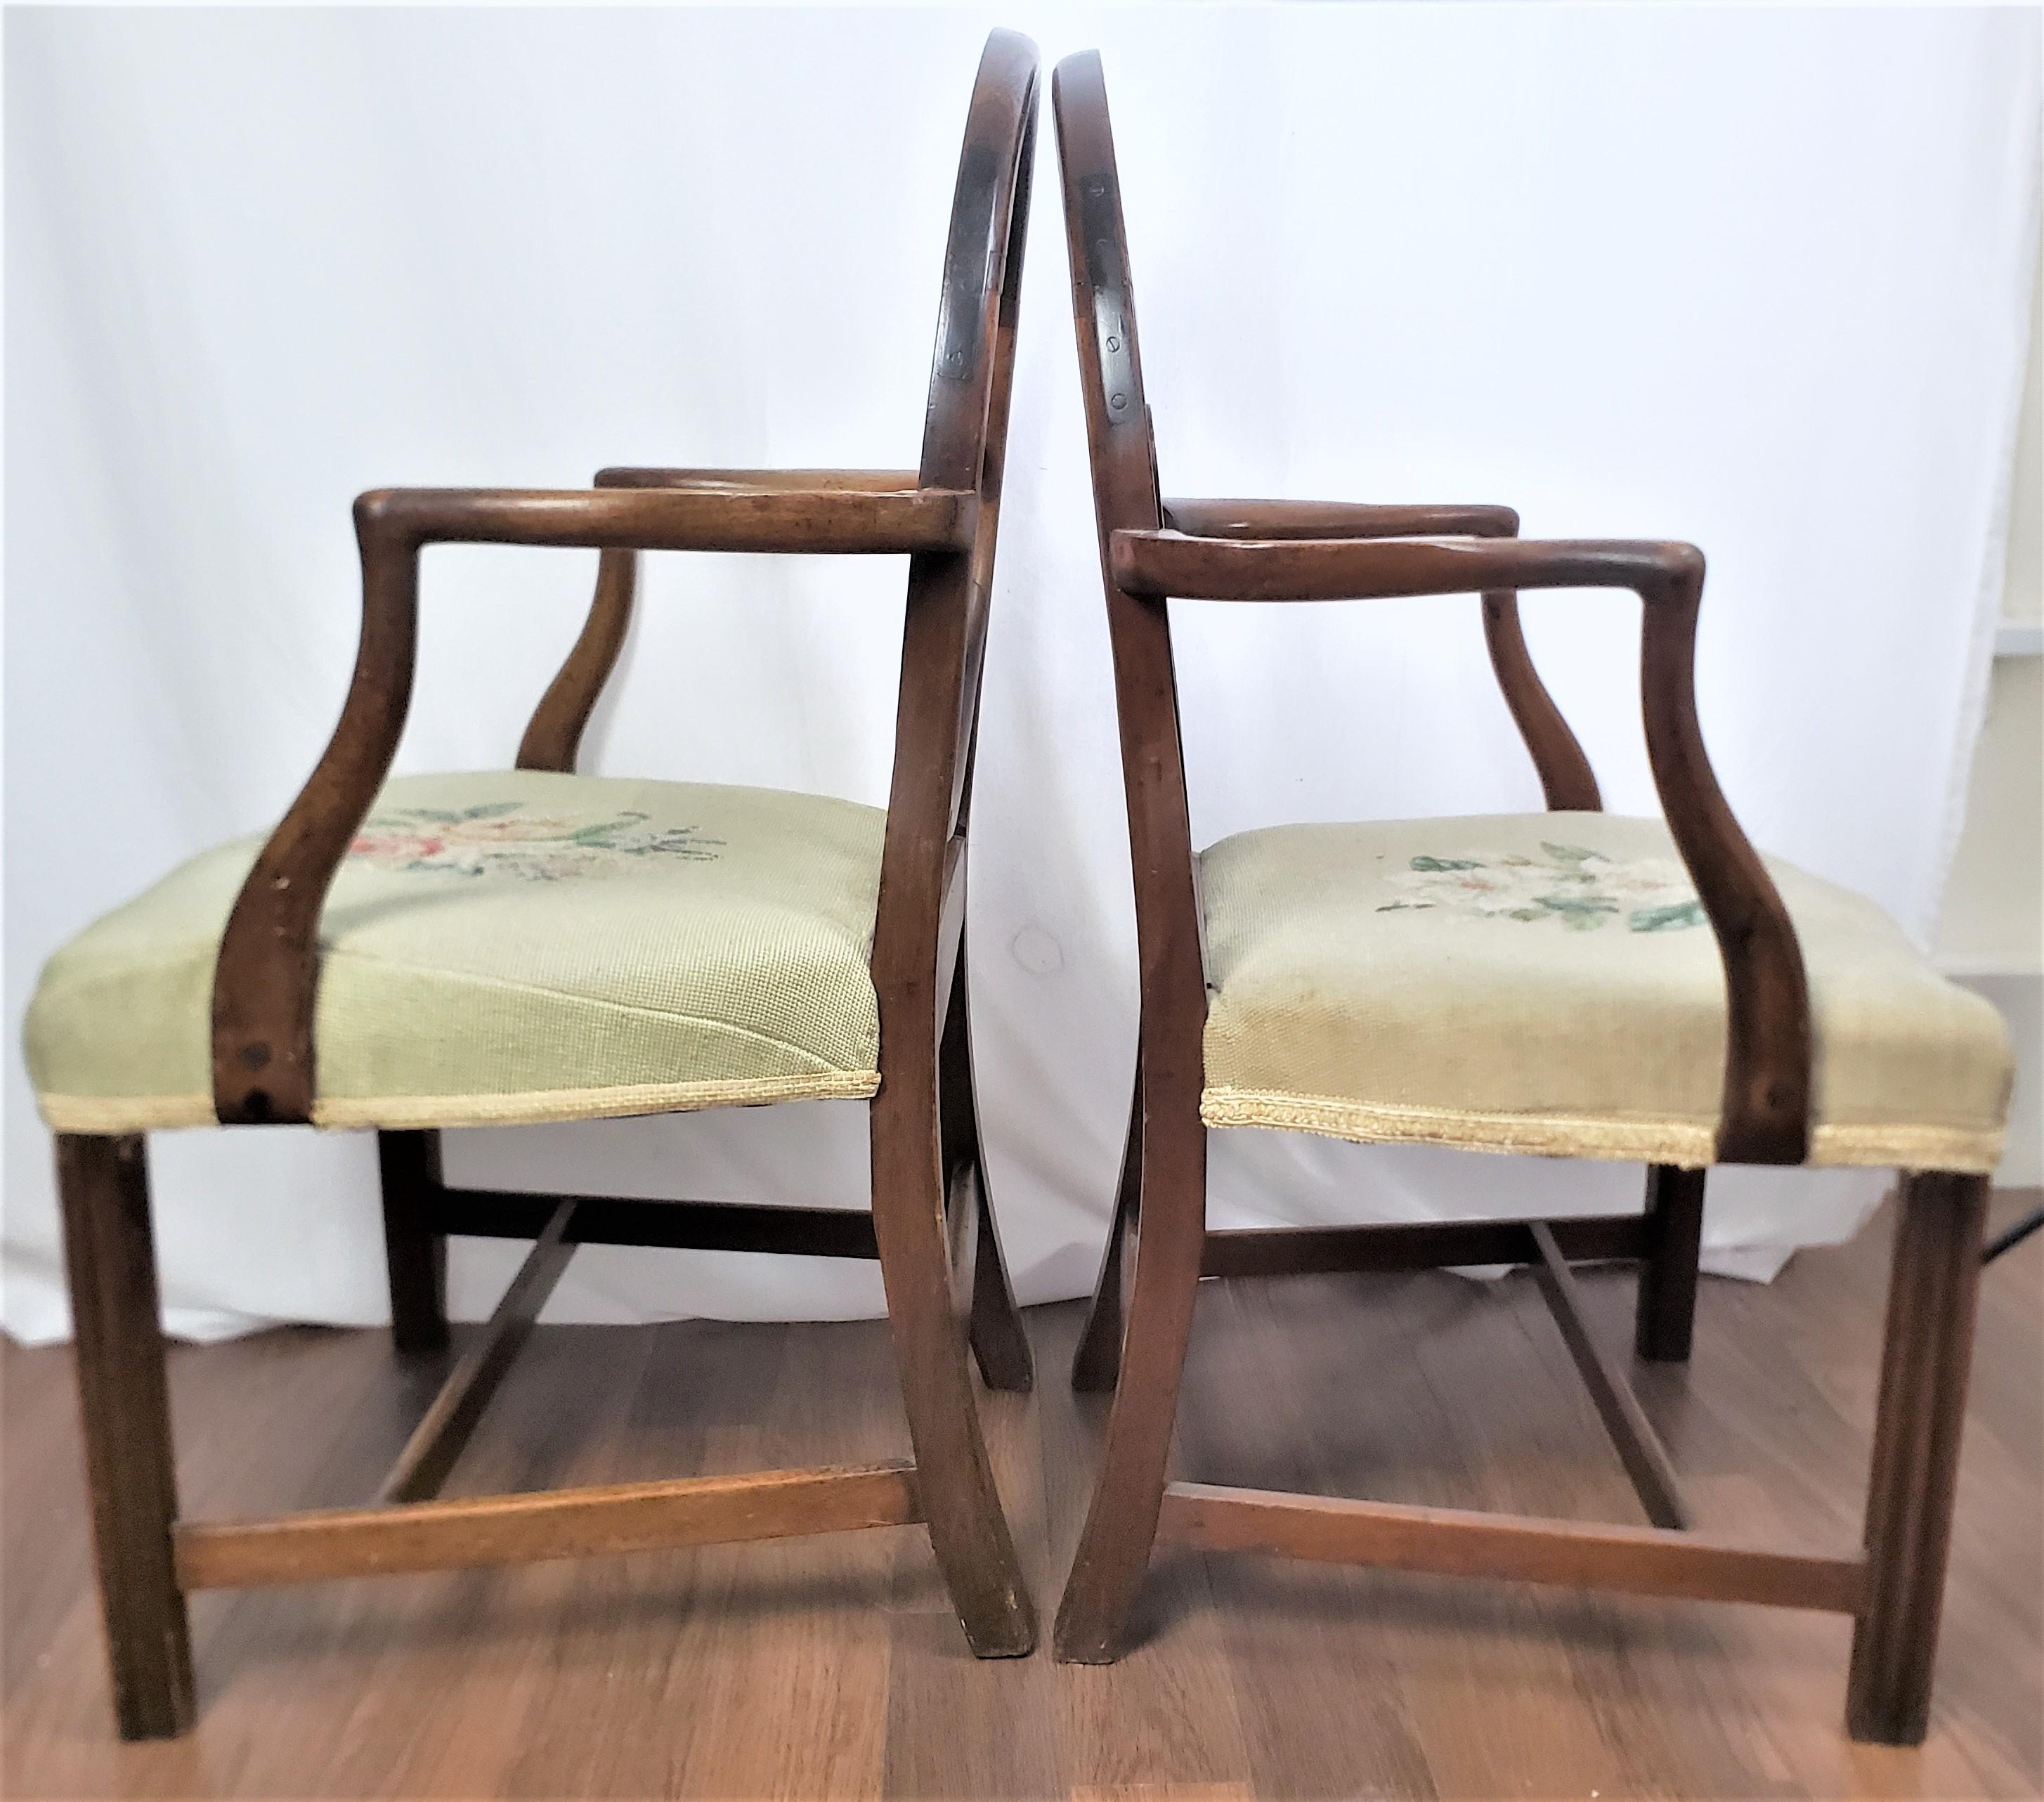 Hand-Crafted Pair of Antique King George III Period Wheelback Armchair or Side Chair Frames For Sale